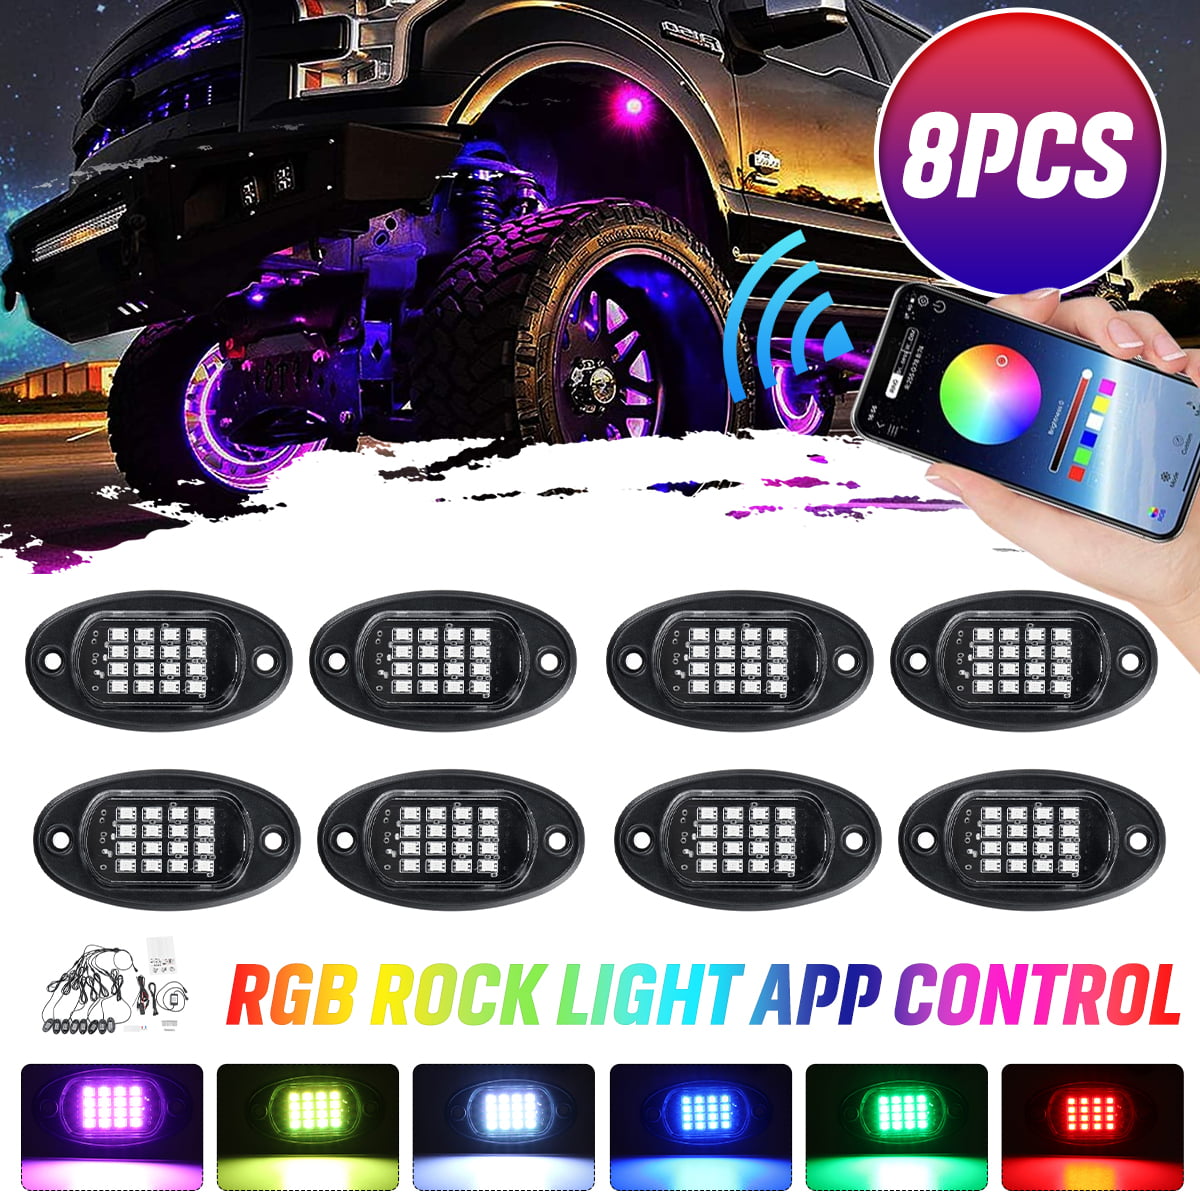 RGB LED Rock Lights Kit Flashing Mode Music Timing Exterior Under Glow Lighting for Jeep Truck Car Off Road UTV ATV SUV 8 Pods Multicolor Underglow Neon Chasing Rock Light with APP/Remote Control 